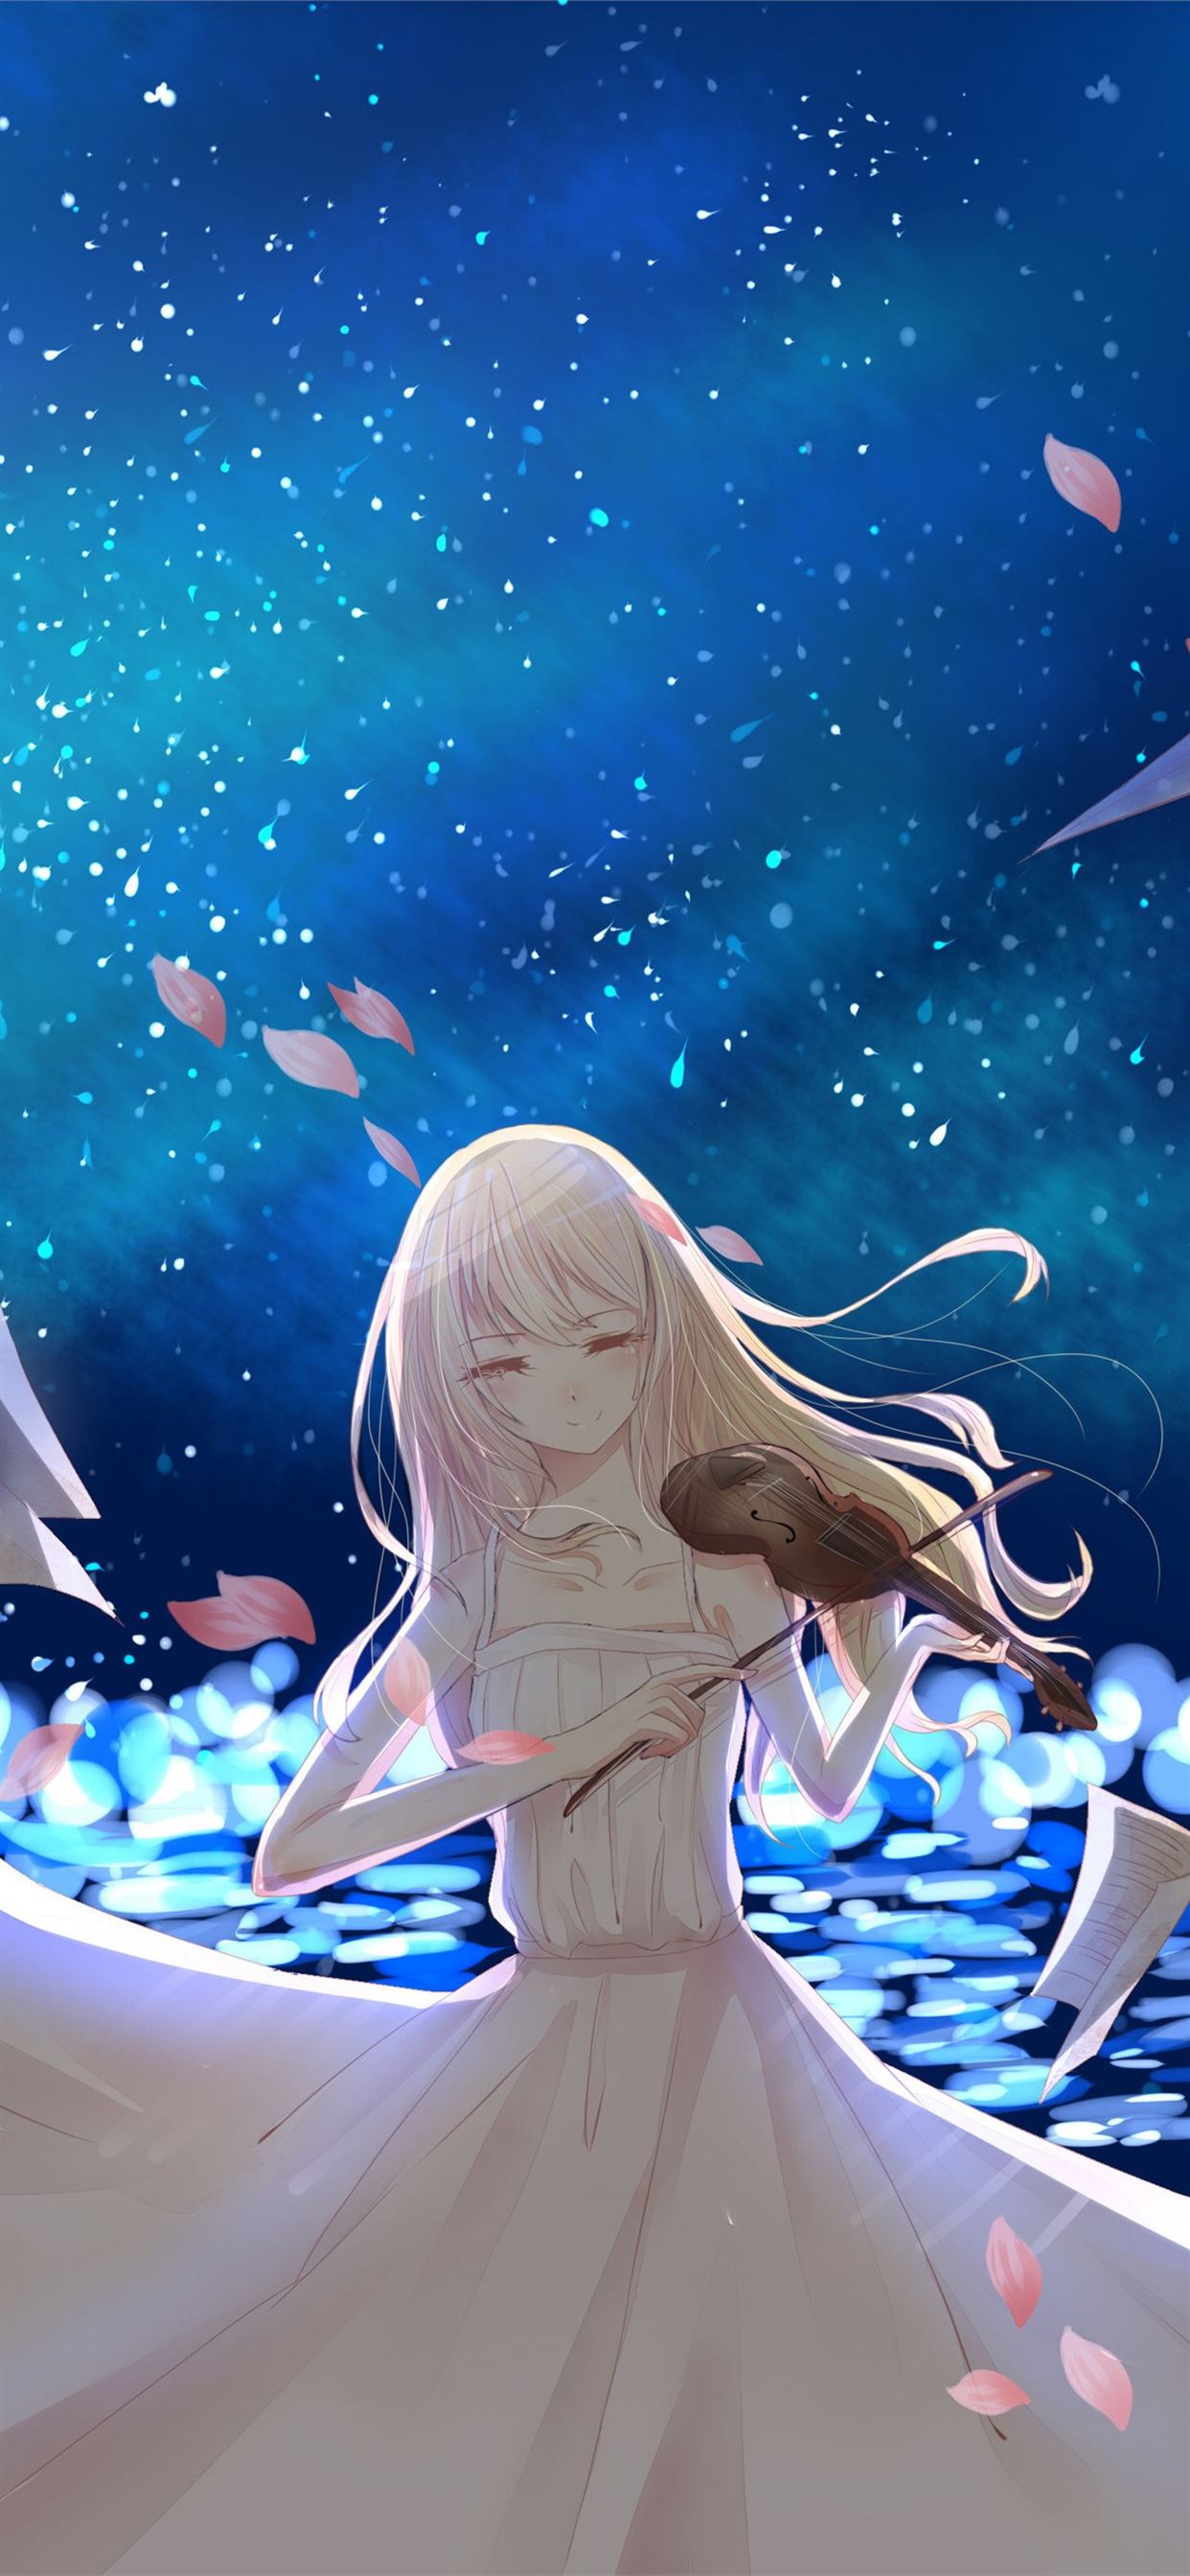 Your Lie In April iPhone Wallpaper Free Download